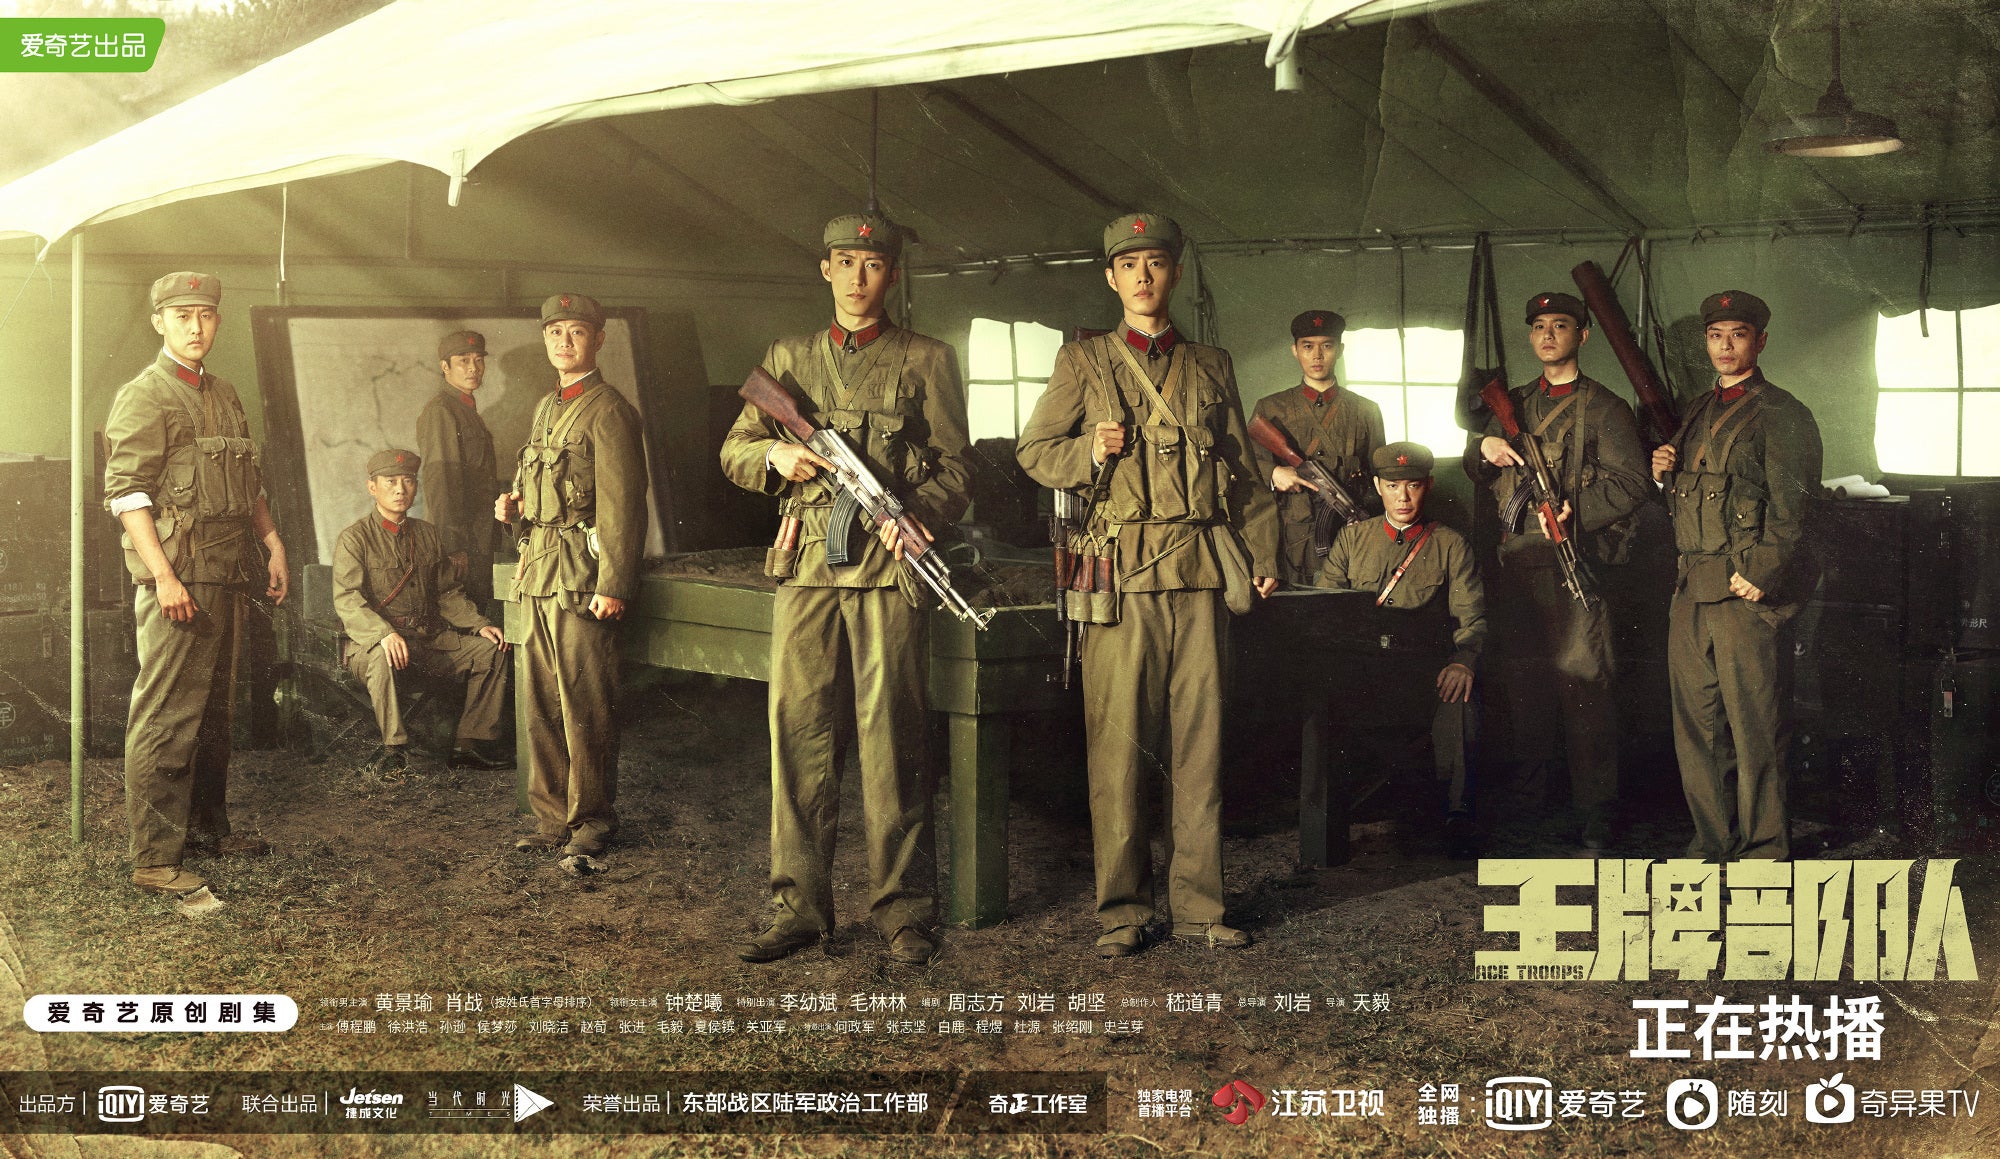 TV ratings for Ace Troops (王牌部队) in Turkey. iQiyi TV series